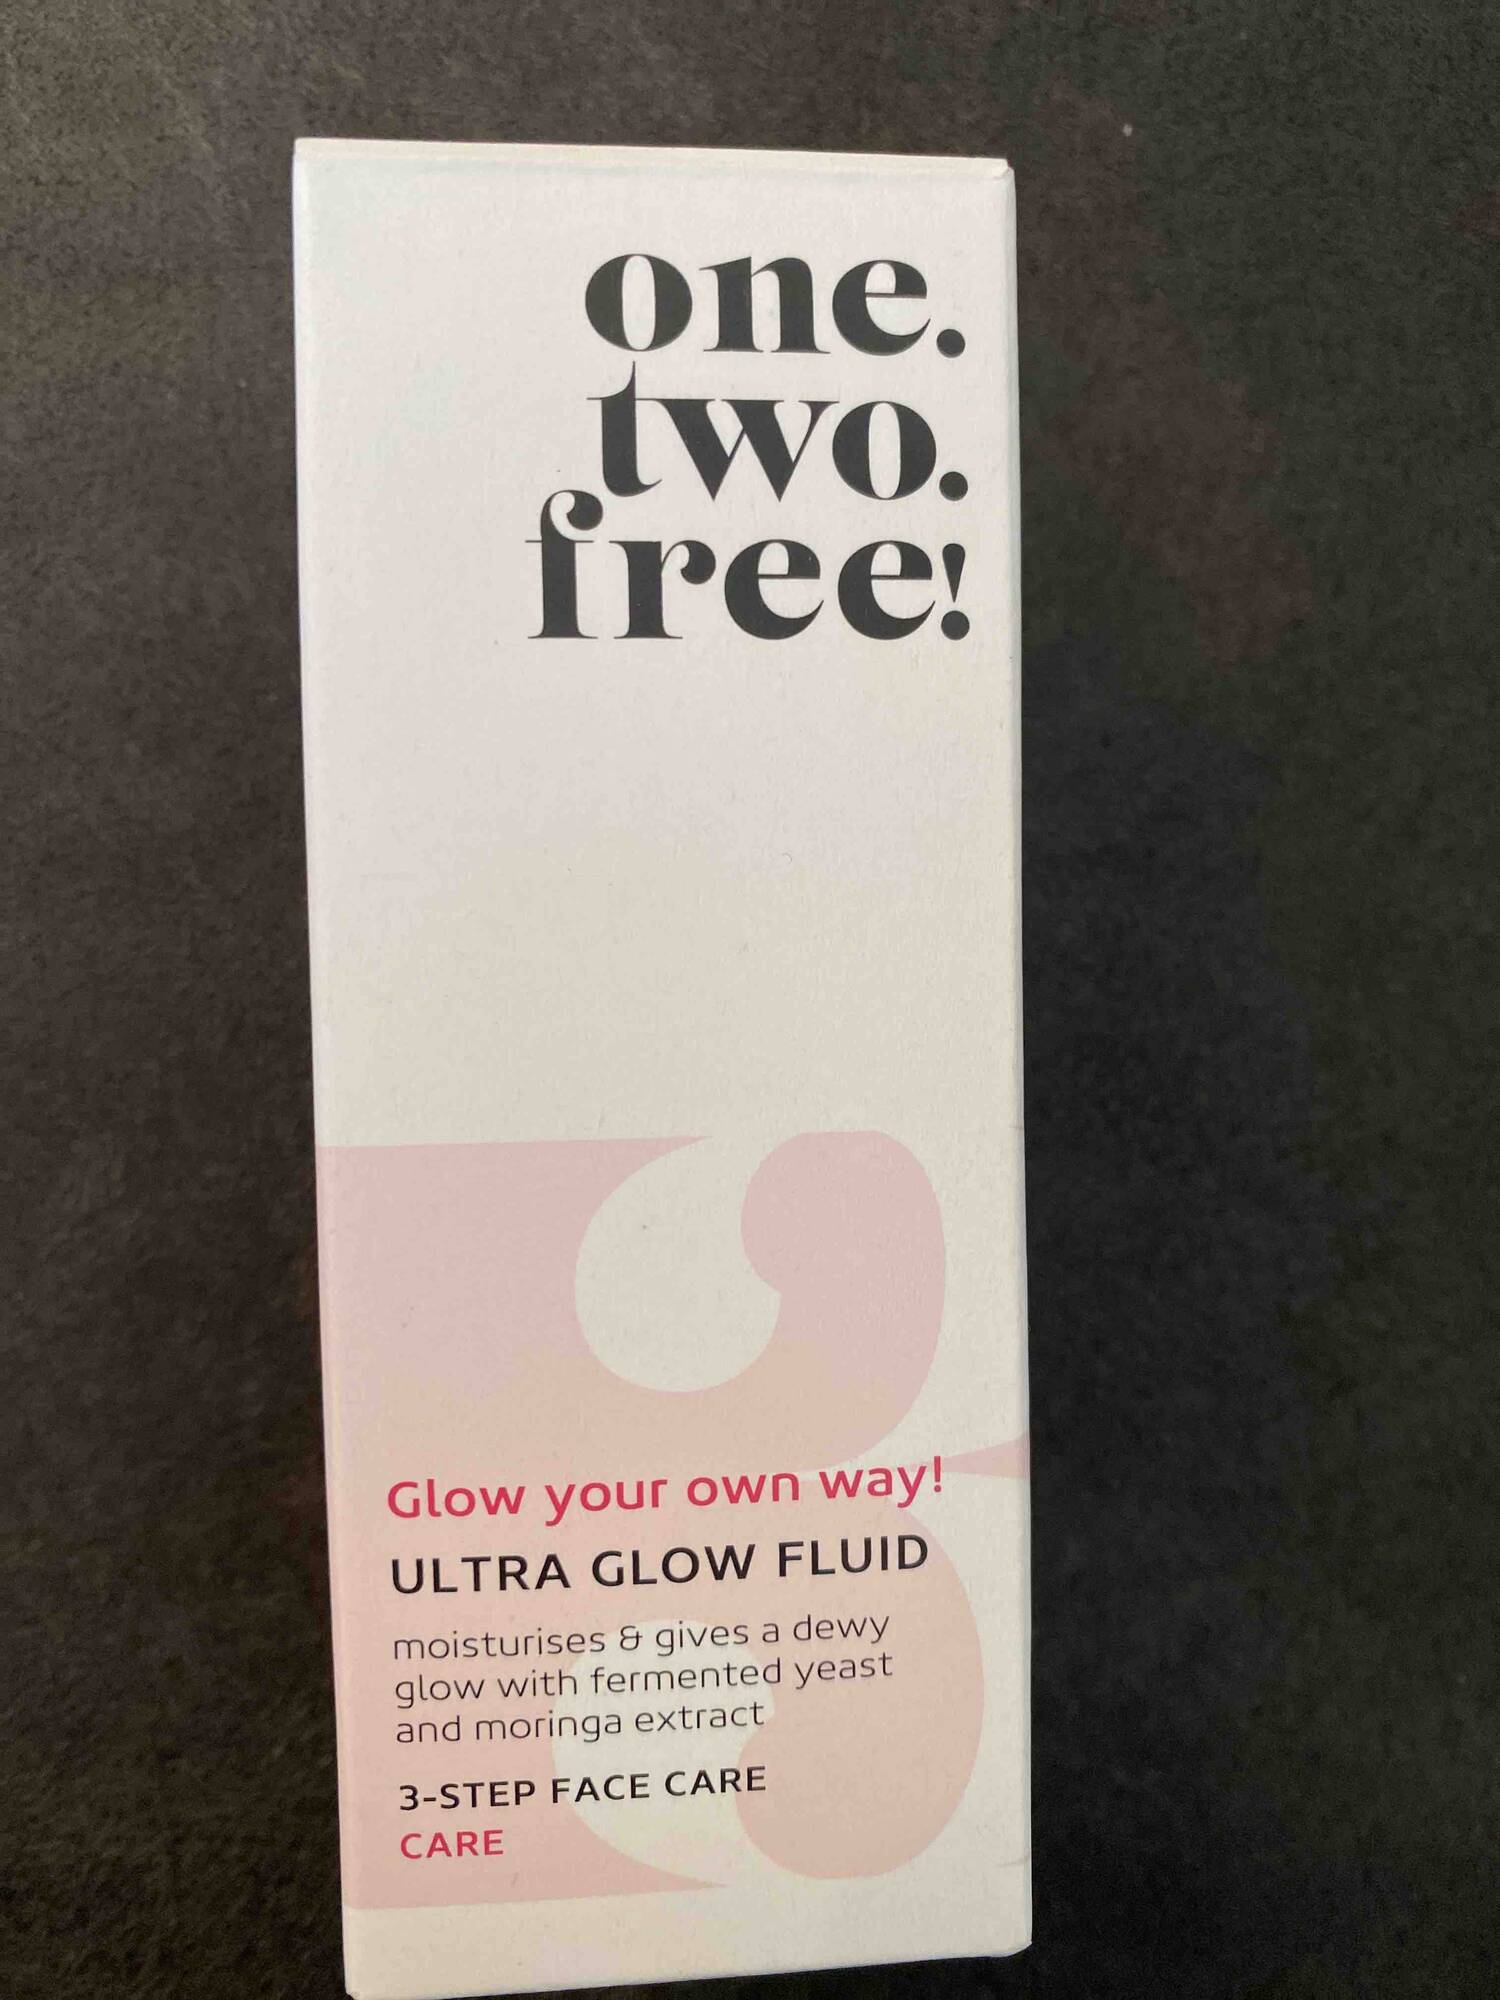 ONE.TWO.FREE! - Ultra glow fluid - 3 Step face care